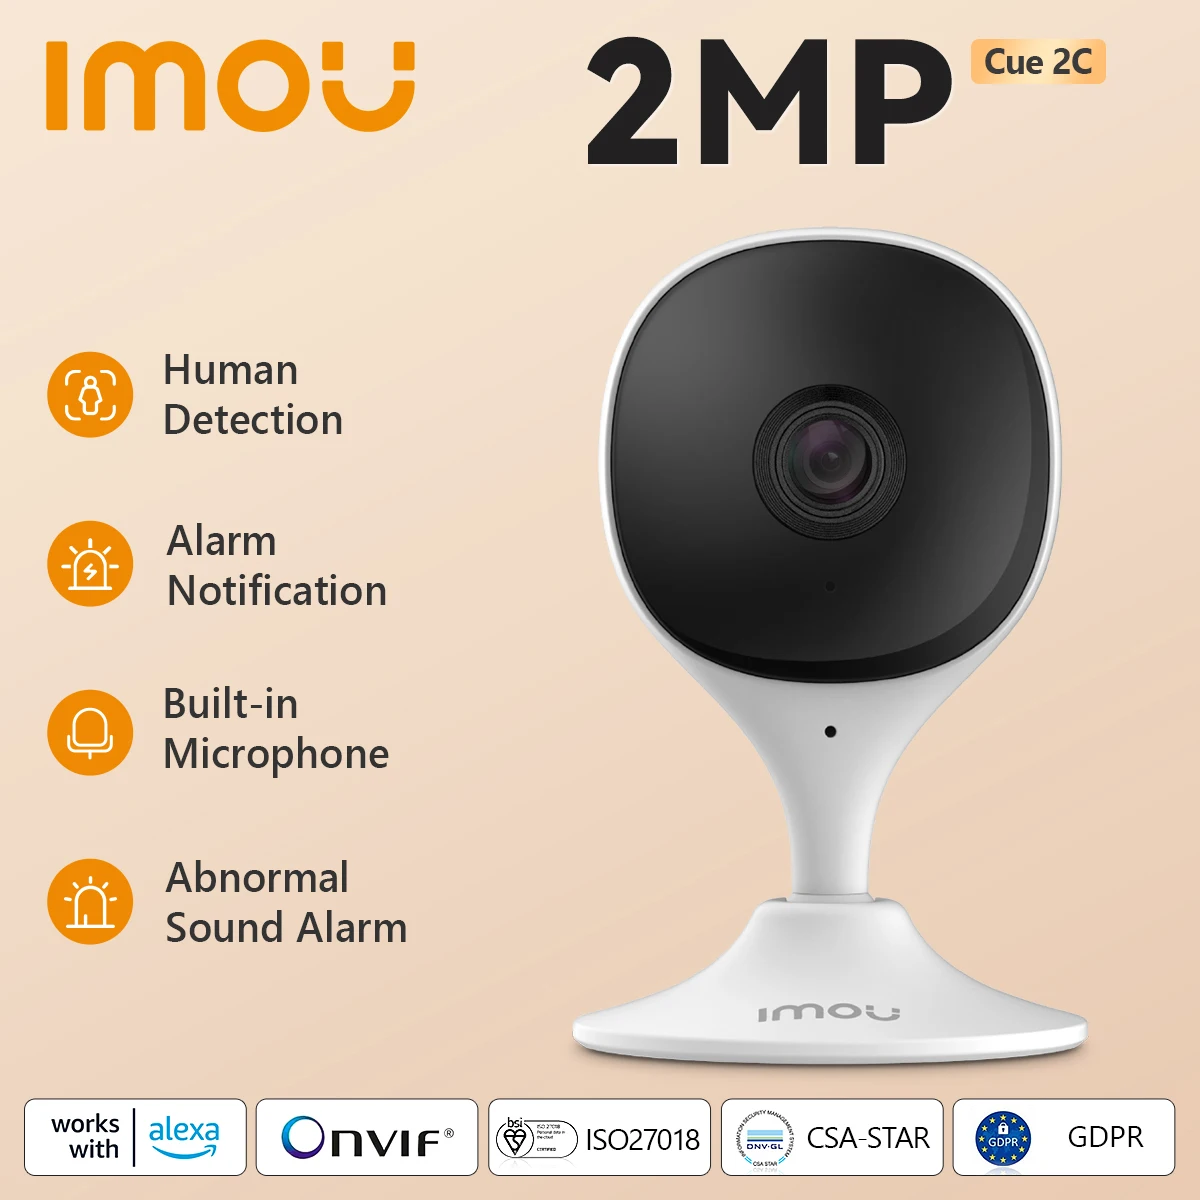 IMOU Cue 2C 1080P Security Action Indoor Camera Baby Monitor Night Vision Device Video Mini Surveillance Wifi Ip Camera